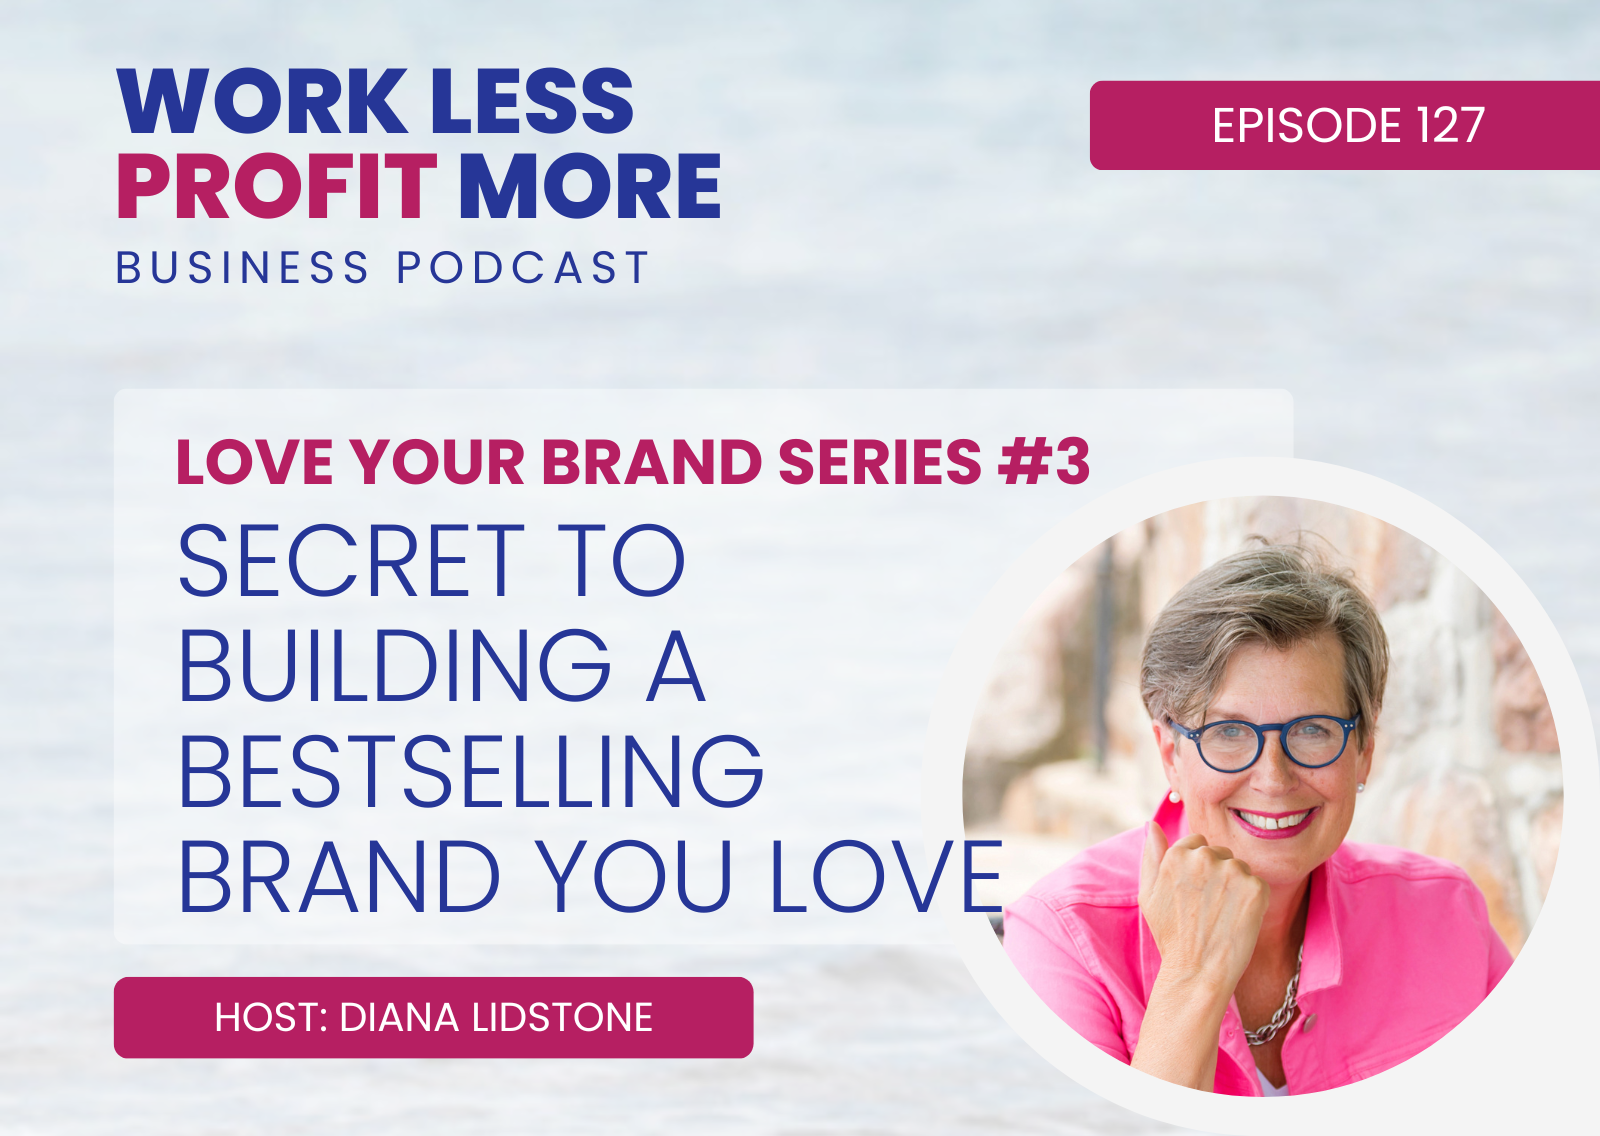 S4 Ep 127 Work Less Profit More Podcast